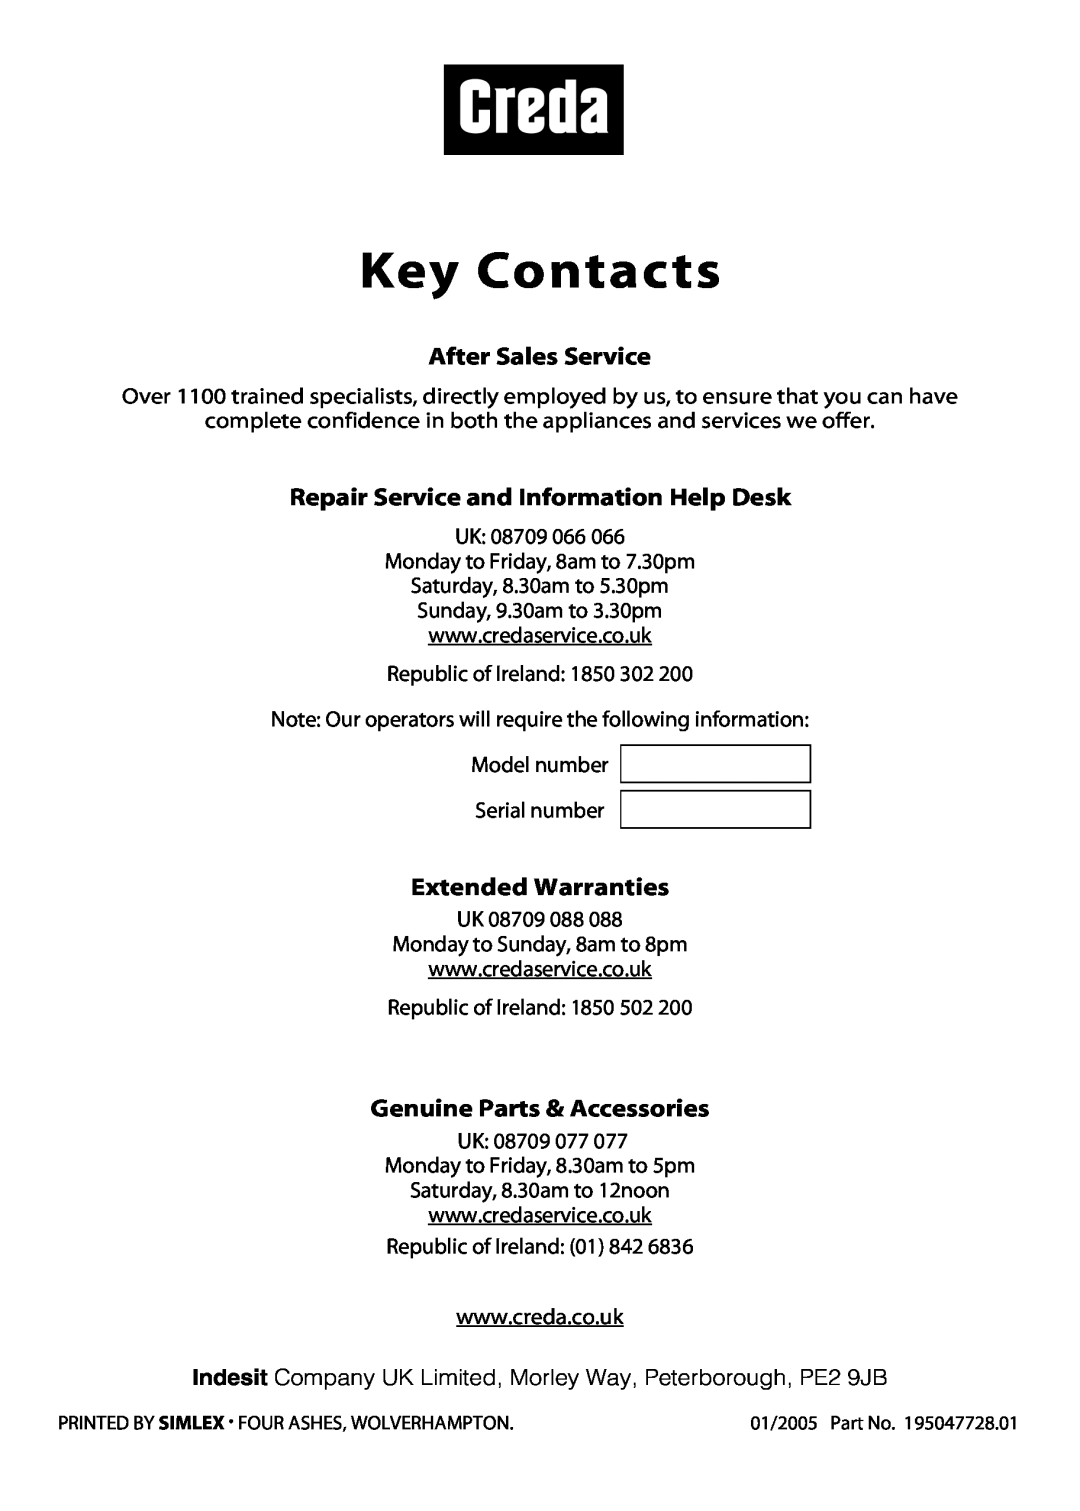 Creda H151E manual Key Contacts, After Sales Service, Repair Service and Information Help Desk, Extended Warranties 